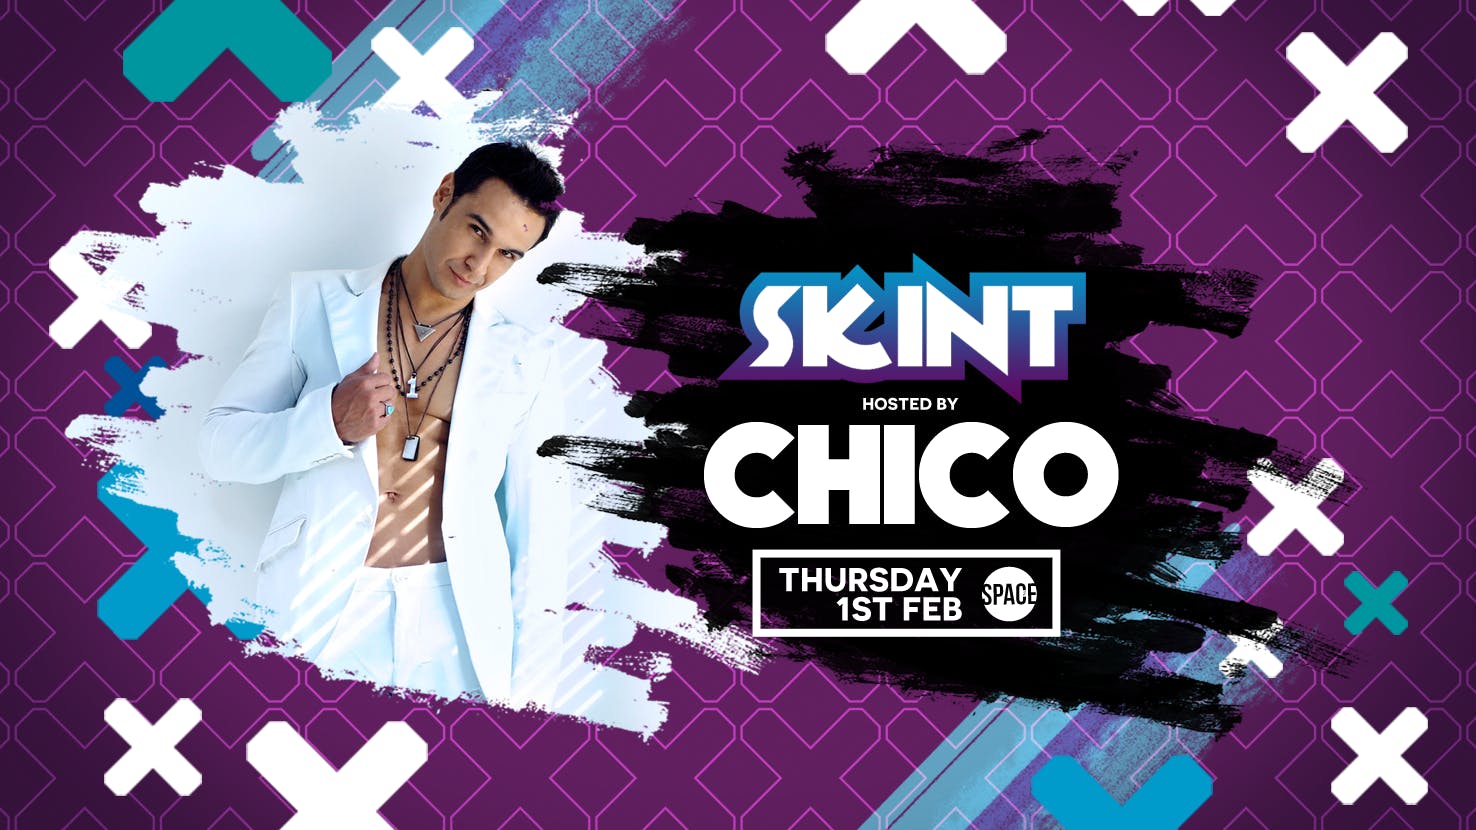 SKINT hosted by CHICO